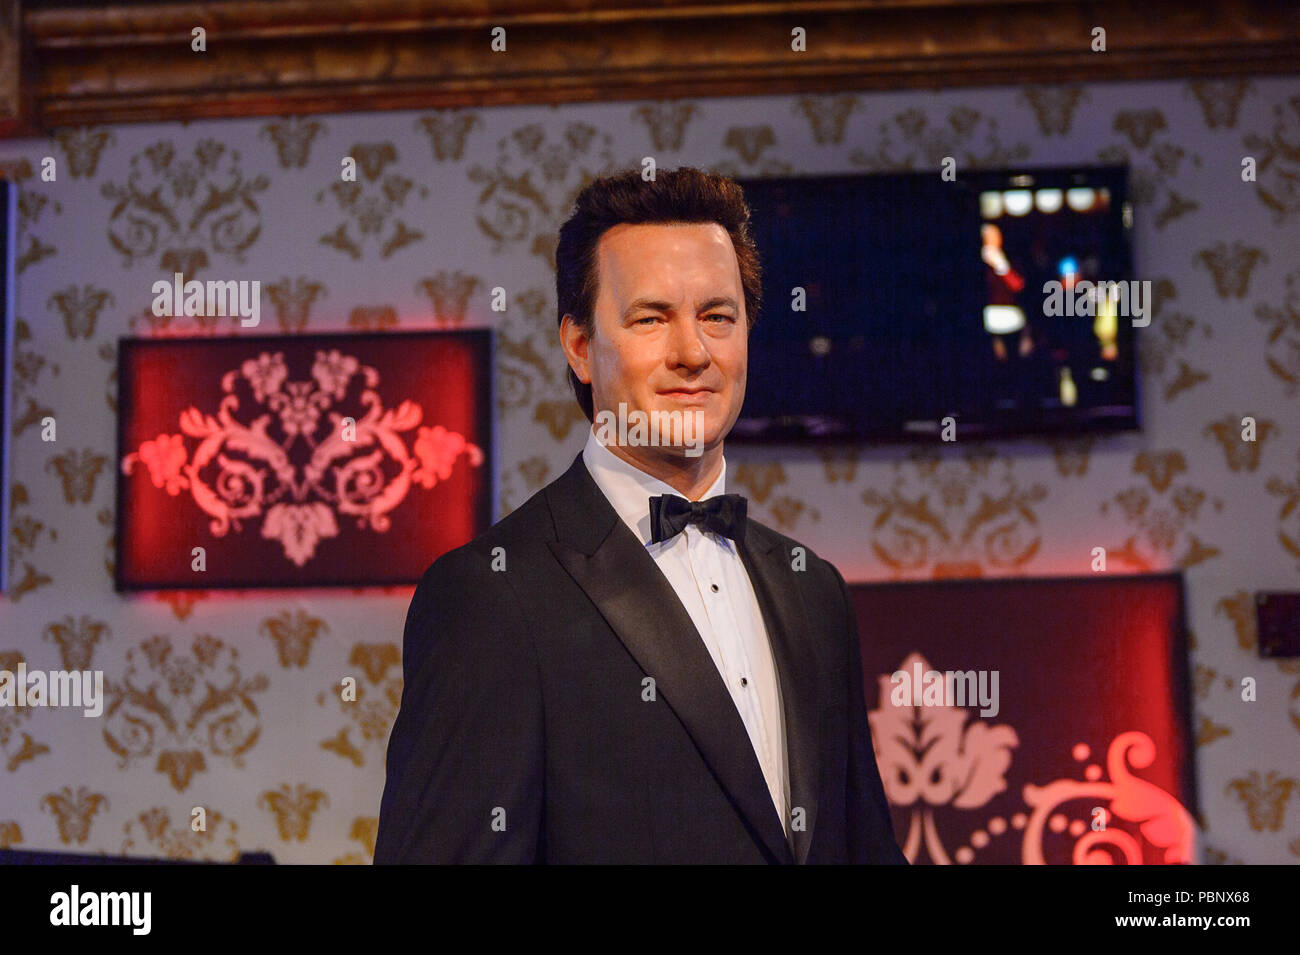 LONDON, ENGLAND - JULY 22, 2016: Tom Hanks, American actor and filmmaker, Madame Tussauds wax museum. It is a major tourist attraction in London Stock Photo